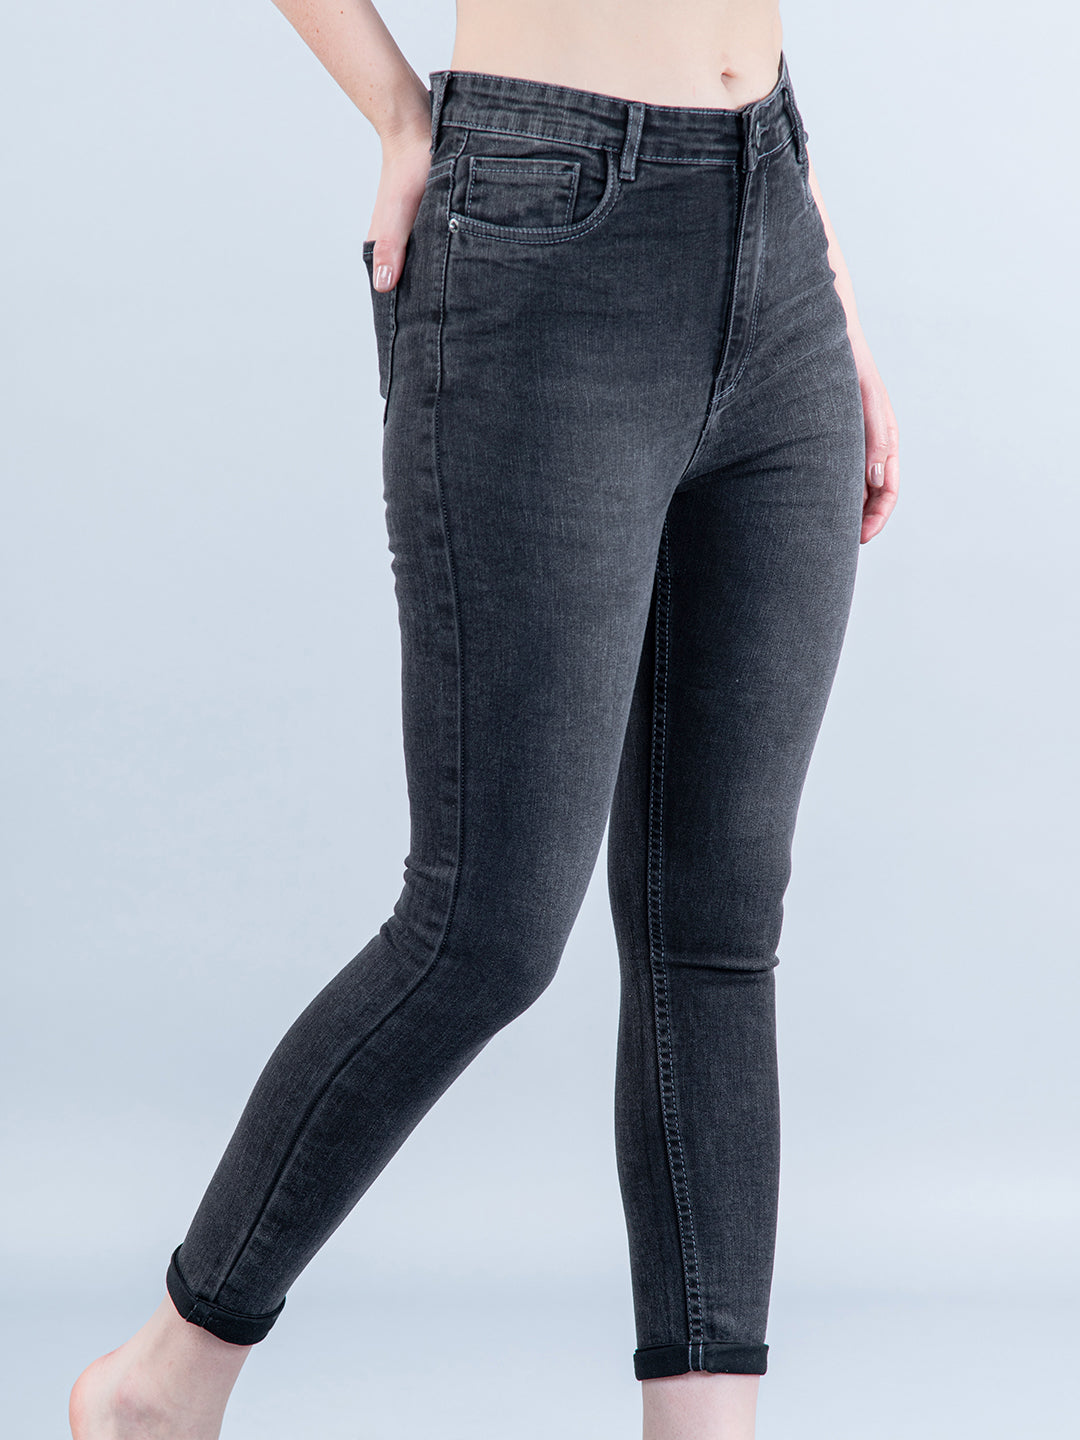 Discover more than 212 black denim jeans for girls latest